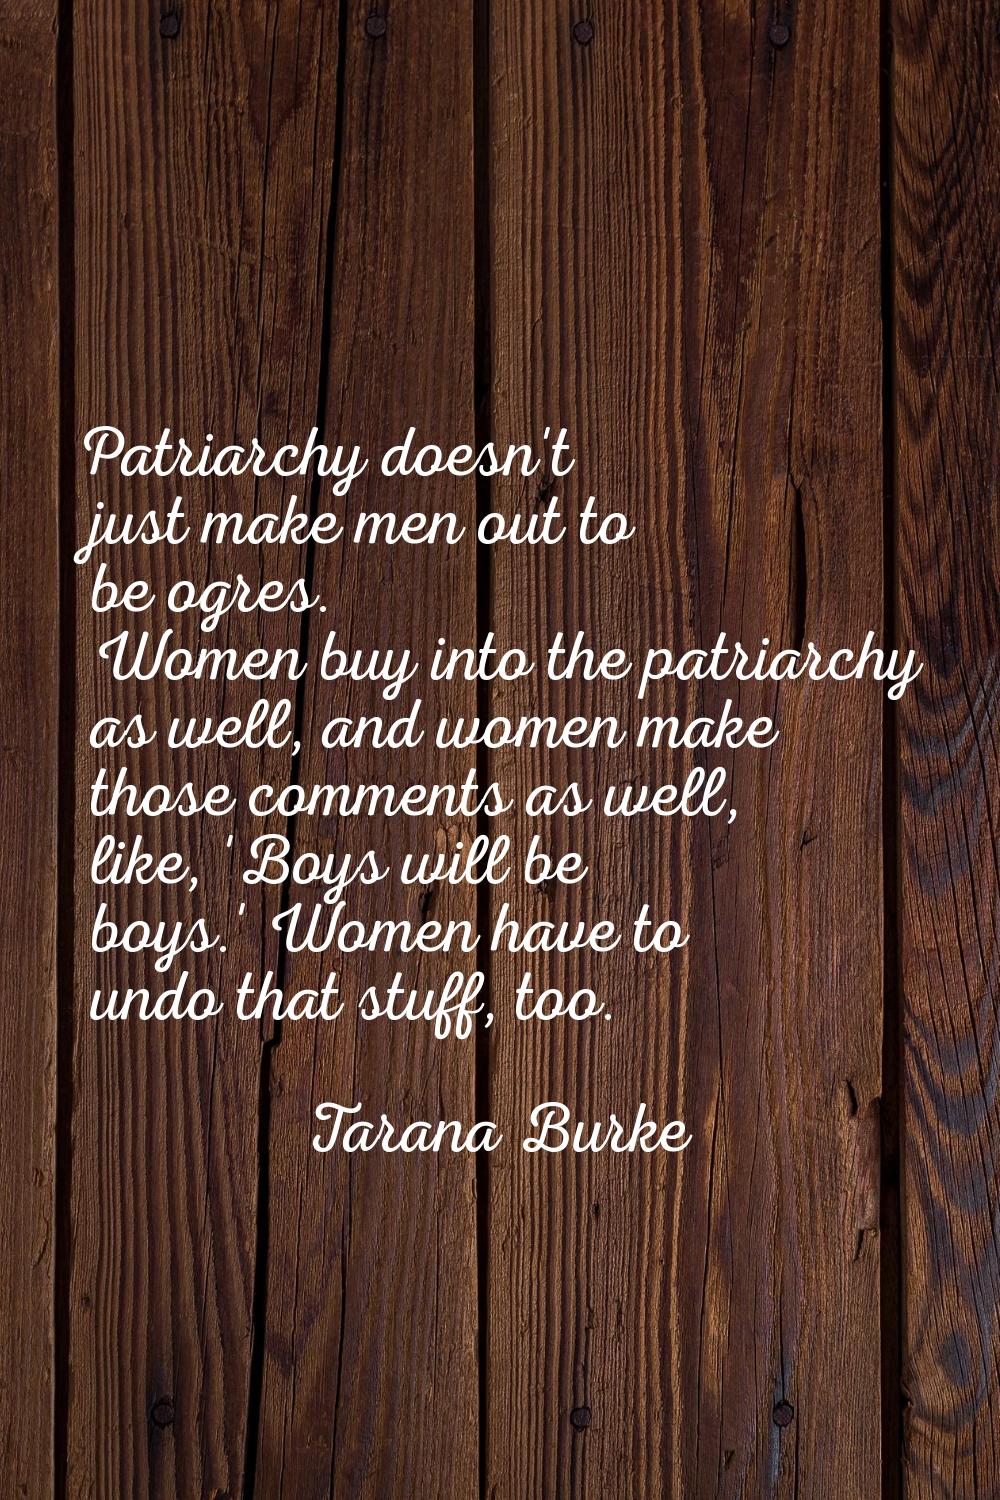 Patriarchy doesn't just make men out to be ogres. Women buy into the patriarchy as well, and women 